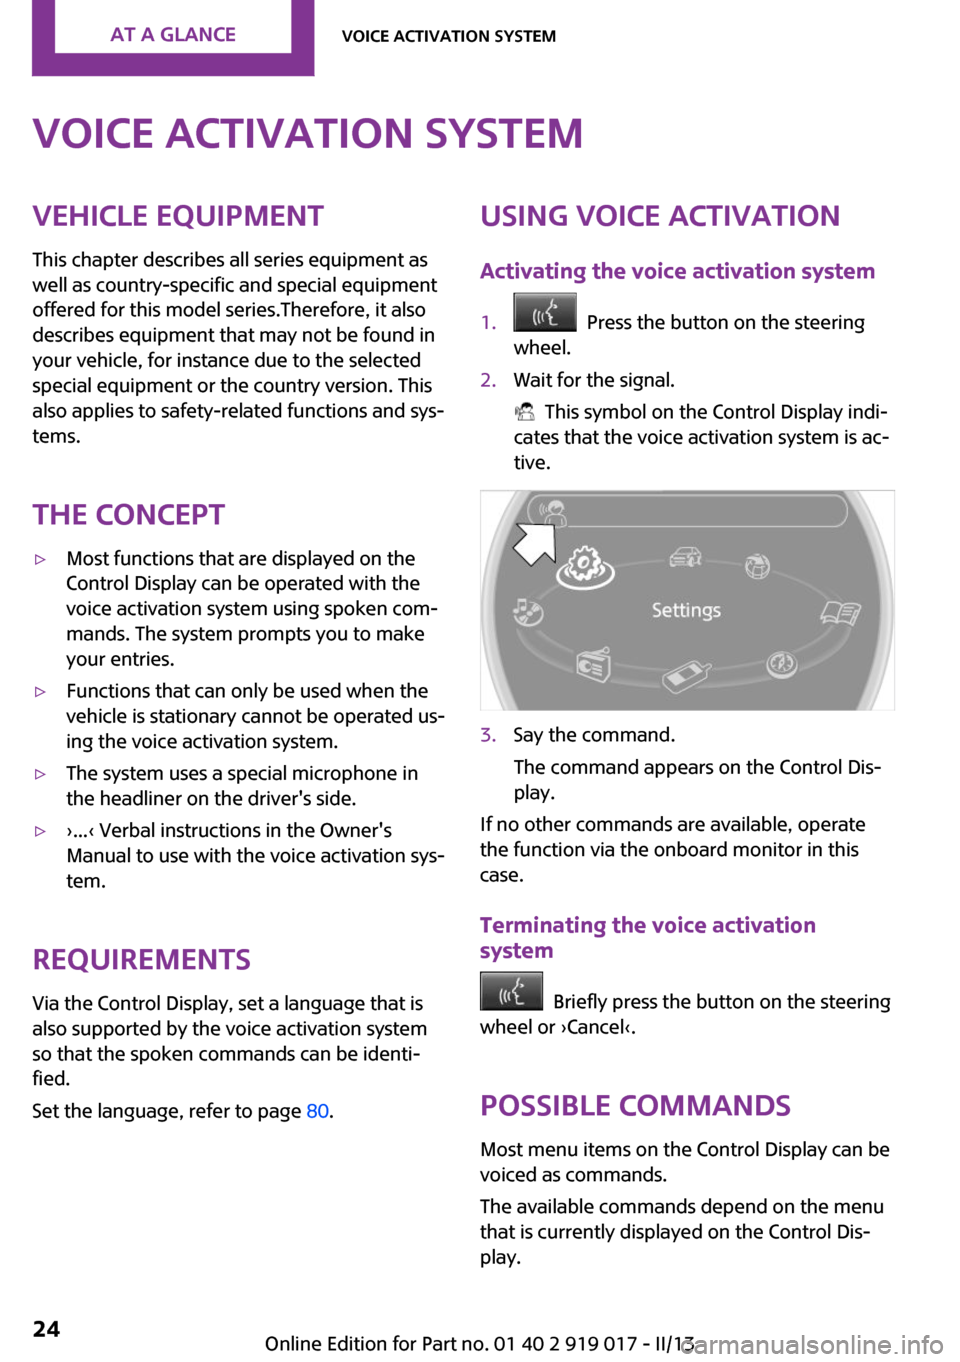 MINI Roadster 2013  Owners Manual Voice activation systemVehicle equipment
This chapter describes all series equipment as
well as country-specific and special equipment
offered for this model series.Therefore, it also
describes equipm